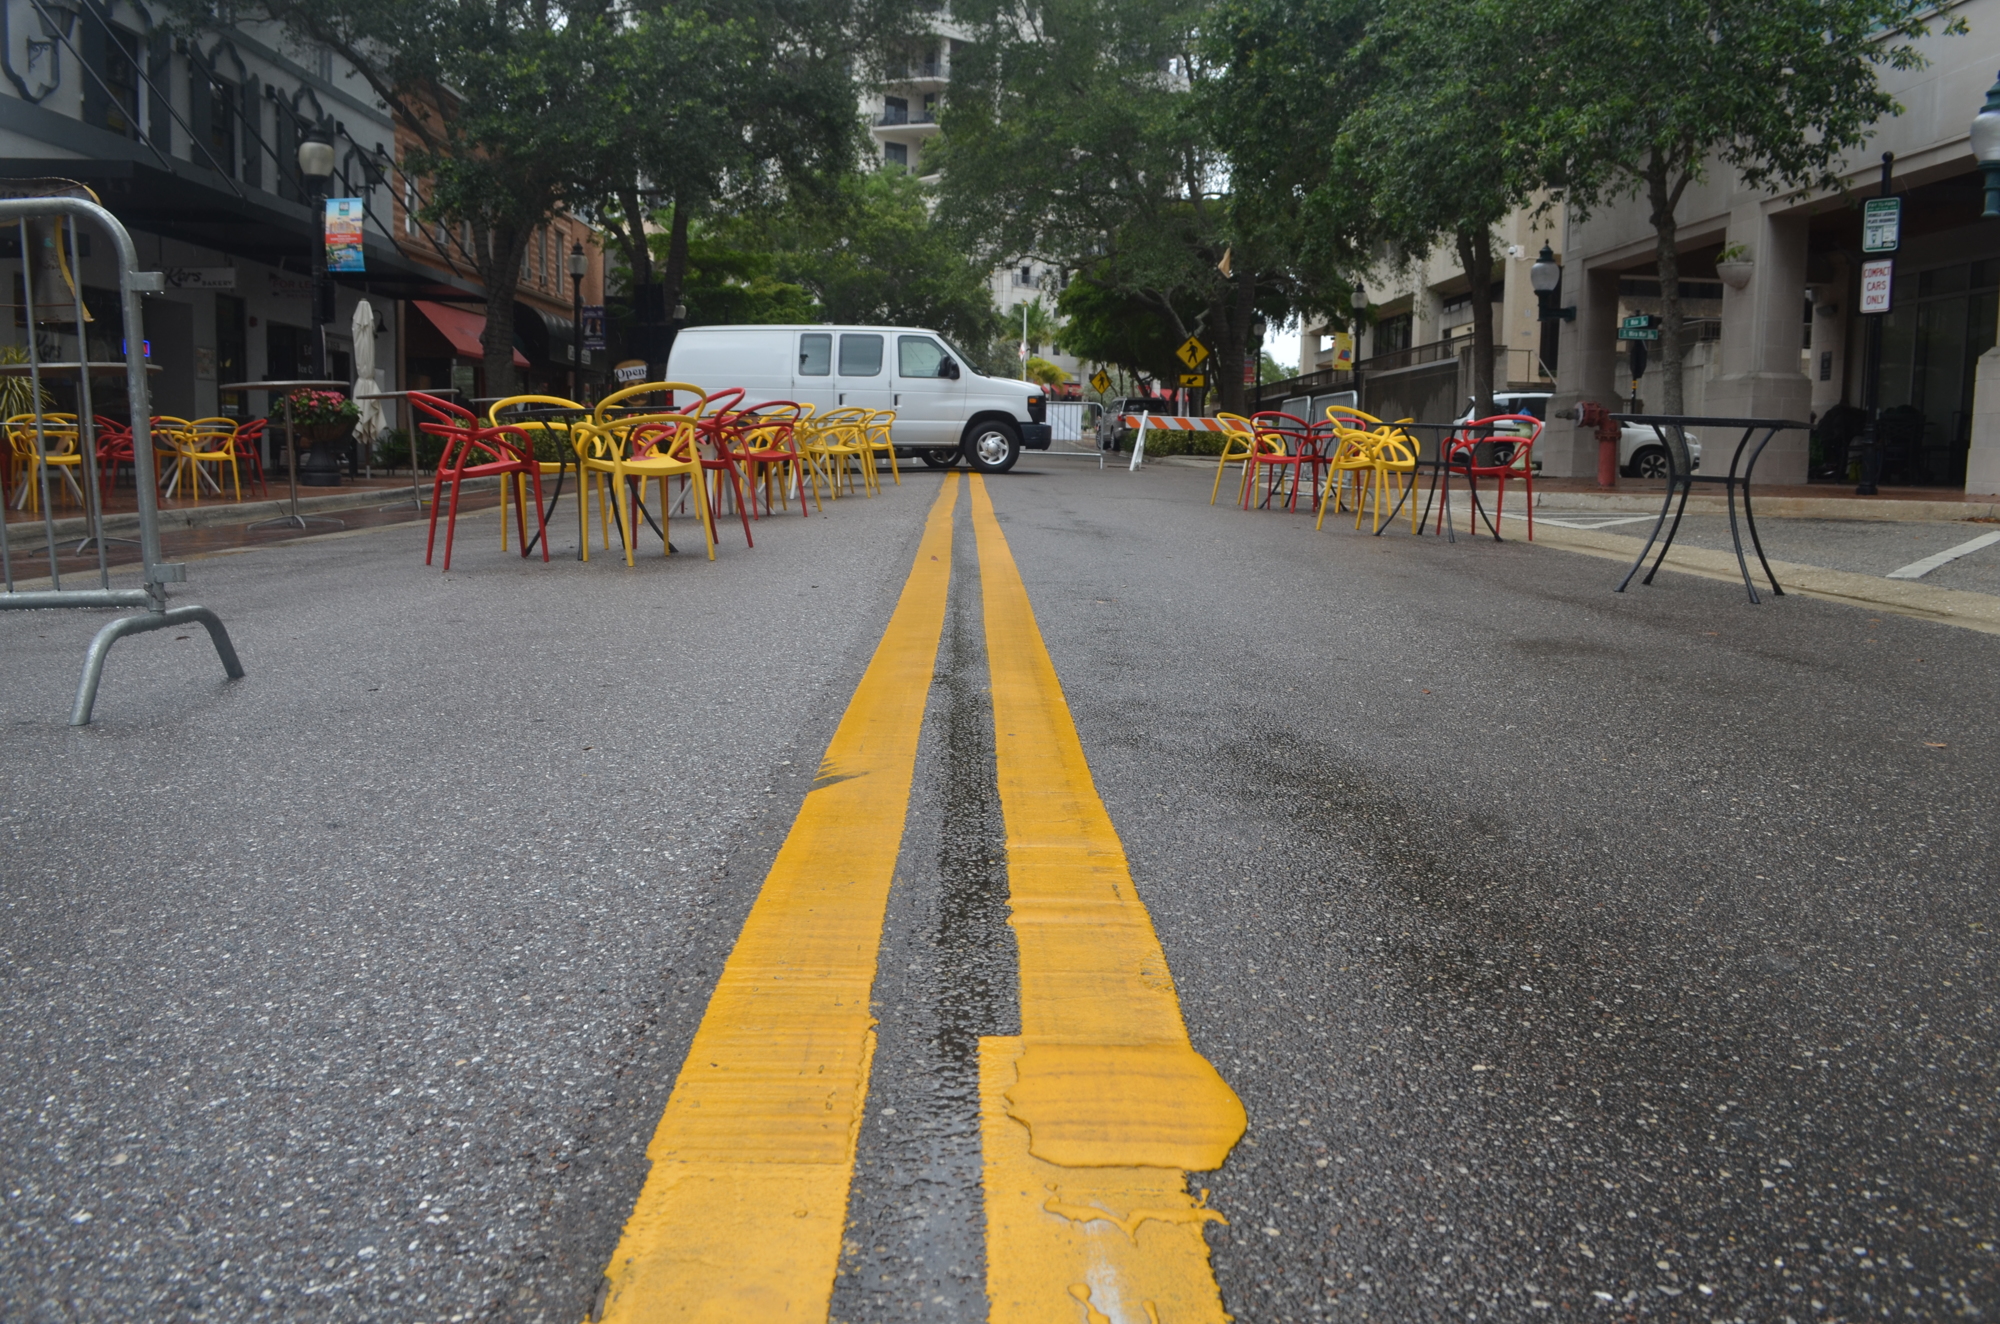 In 2020 and the first half of 2021, the city closed portions of Main Street and Lemon Avenue to facilitate expanded outdoor dining. The program expired when the city stopped extending its COVID-19 state of emergency. File photo